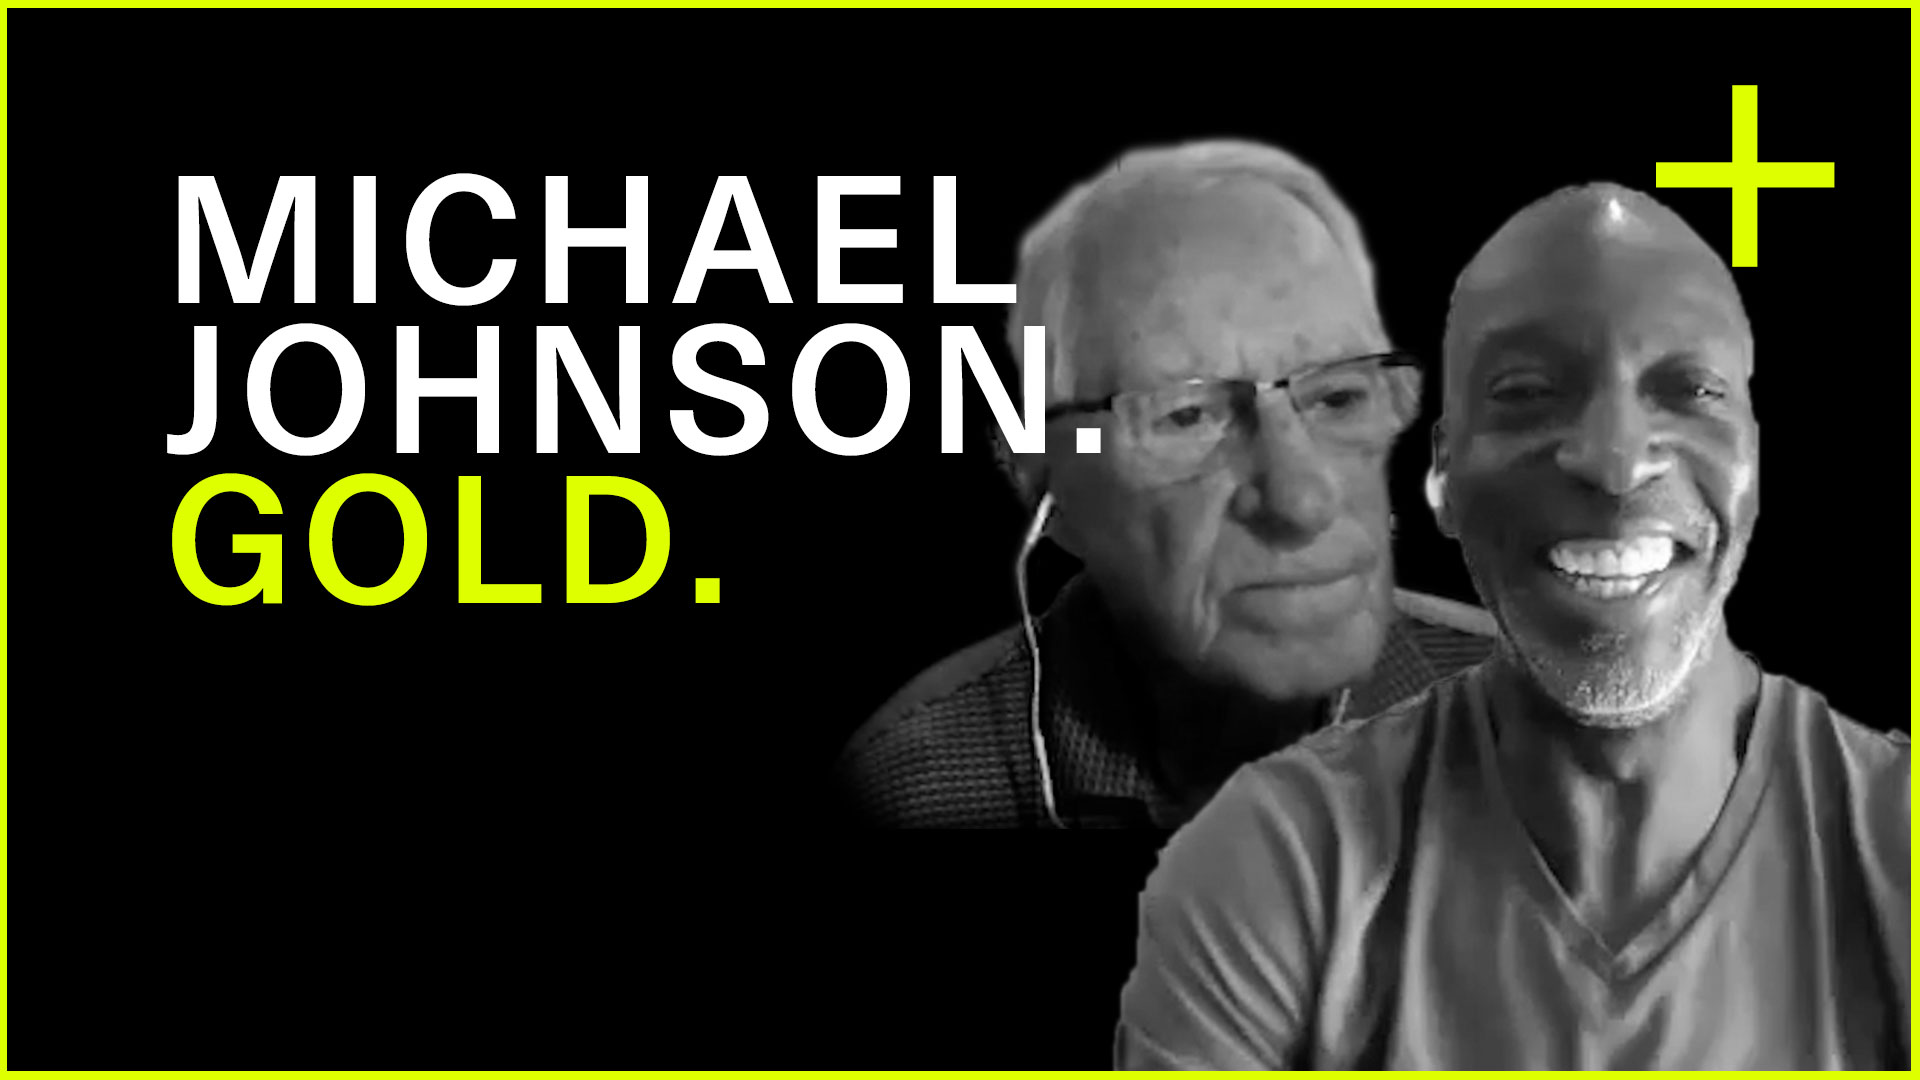 Performance People - Michael Johnson + ‘Coach’ Clyde Hart